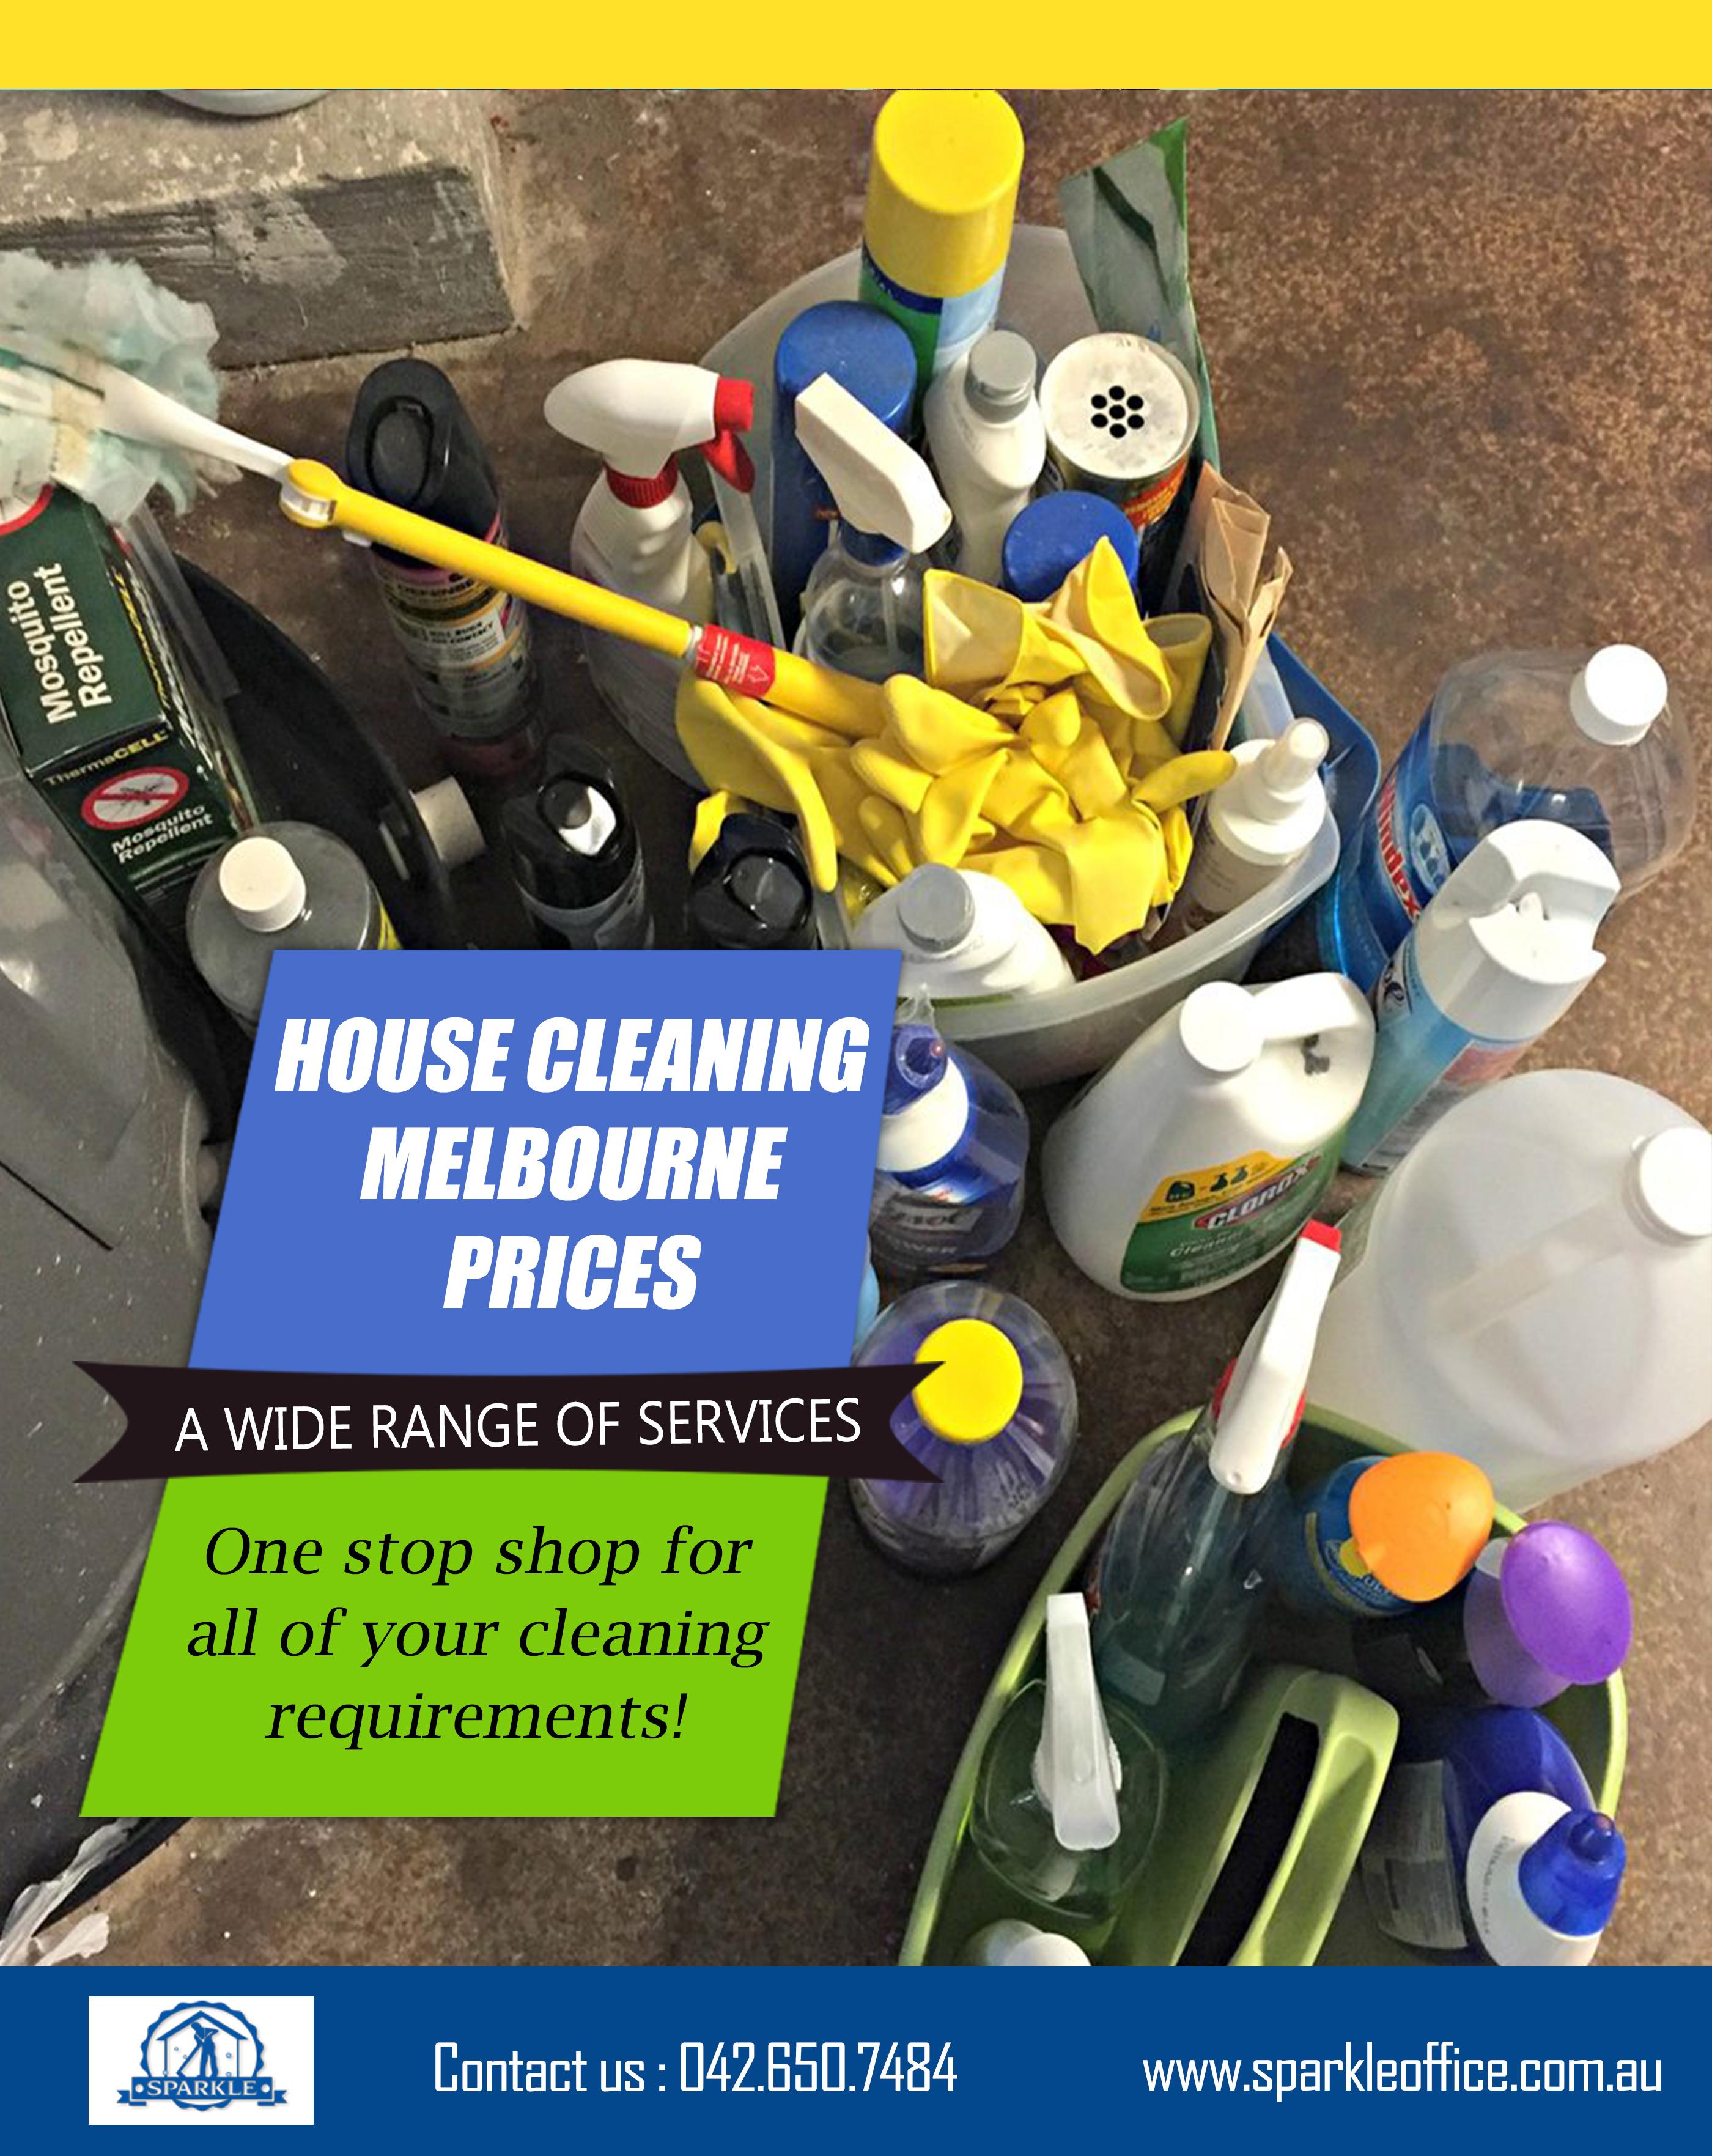 House Cleaning Melbourne Prices